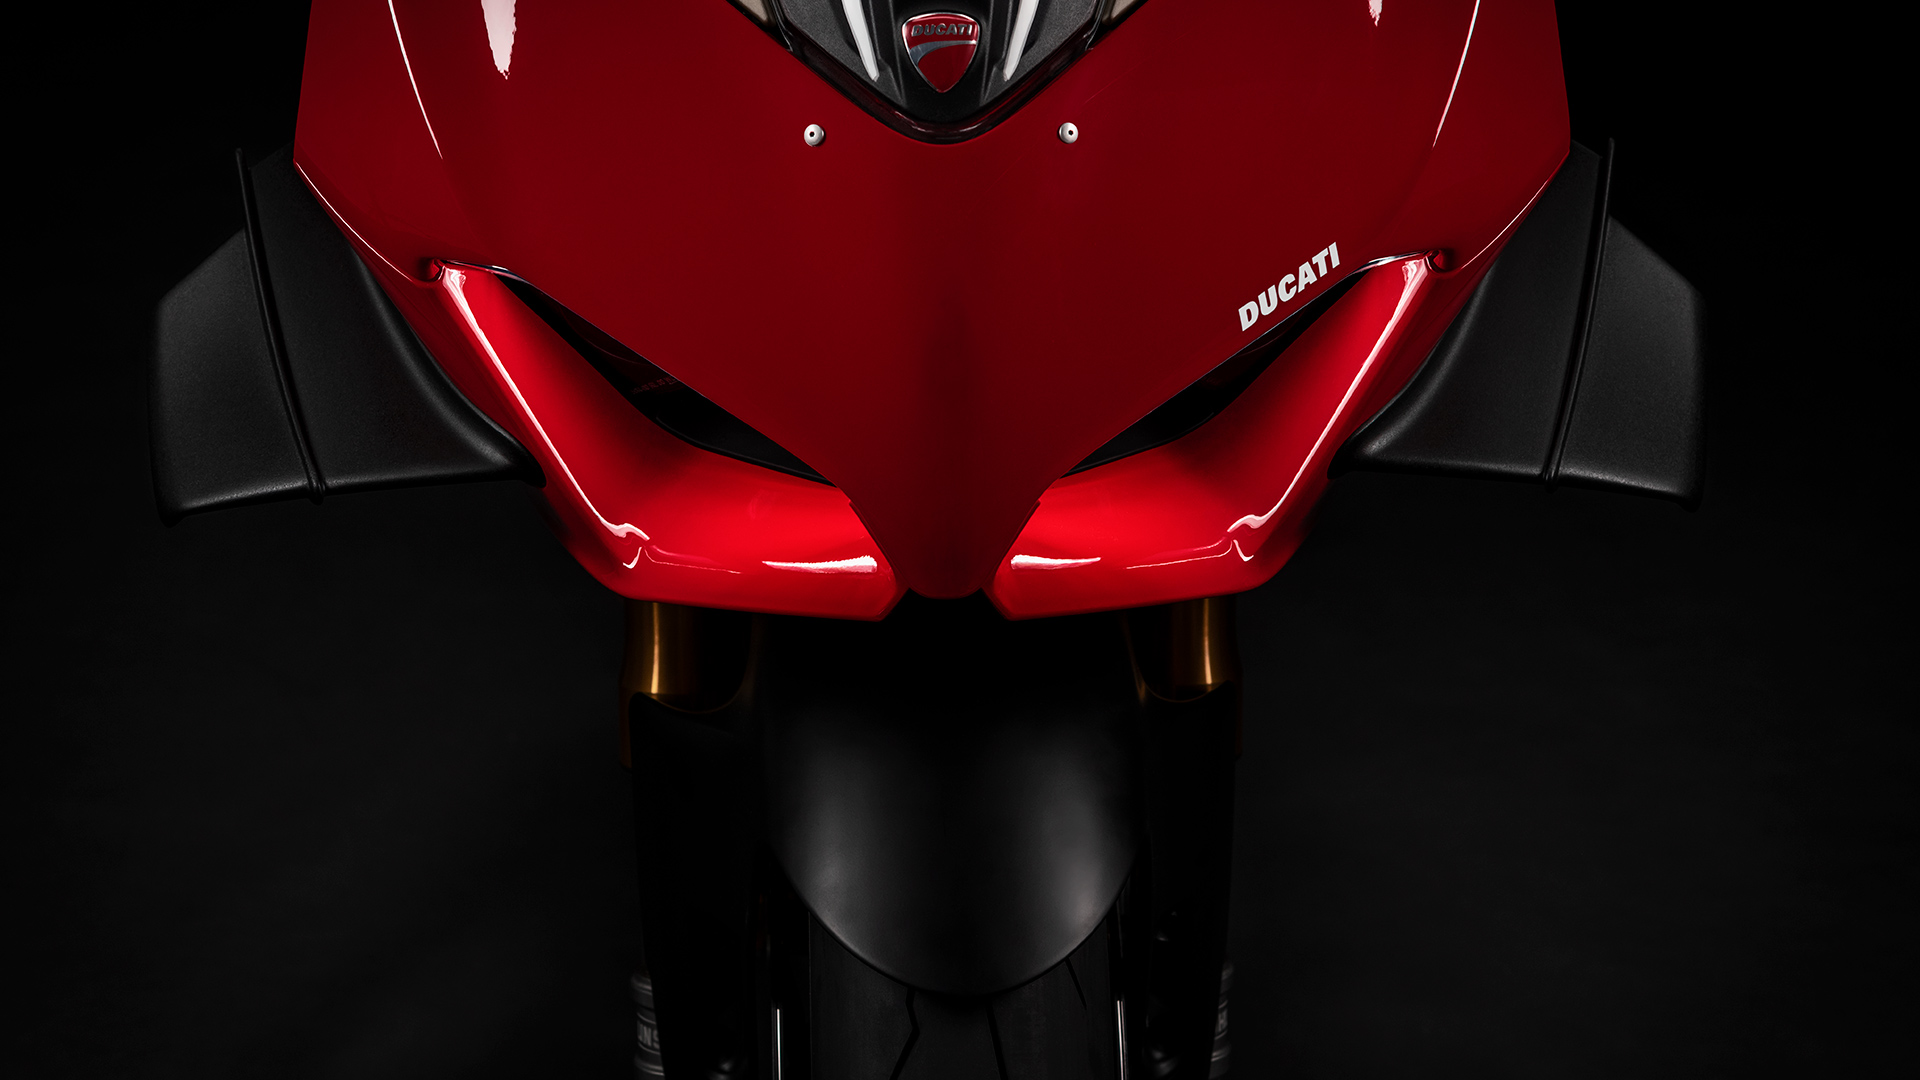 Panigale-V4-S-MY20-Red-07-Gallery-1920x1080